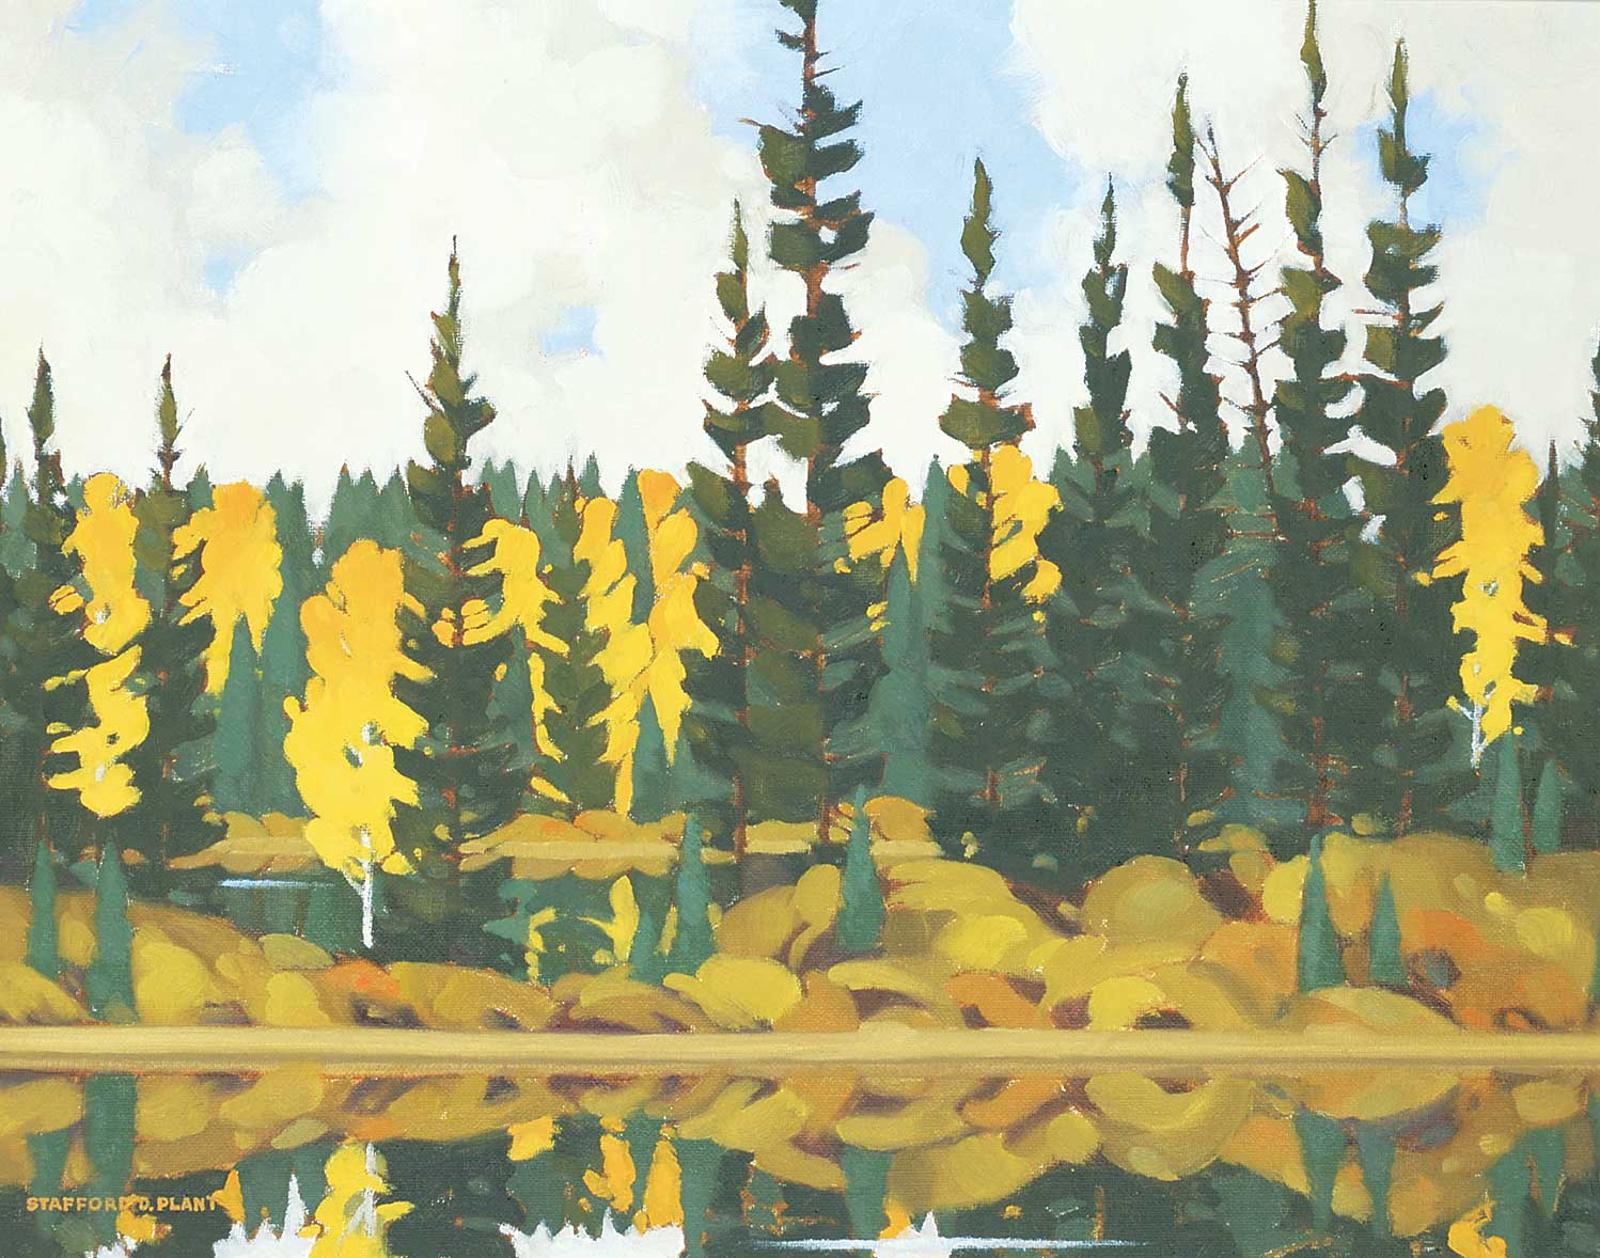 Stafford Donald Plant (1914-2000) - Caribou Country